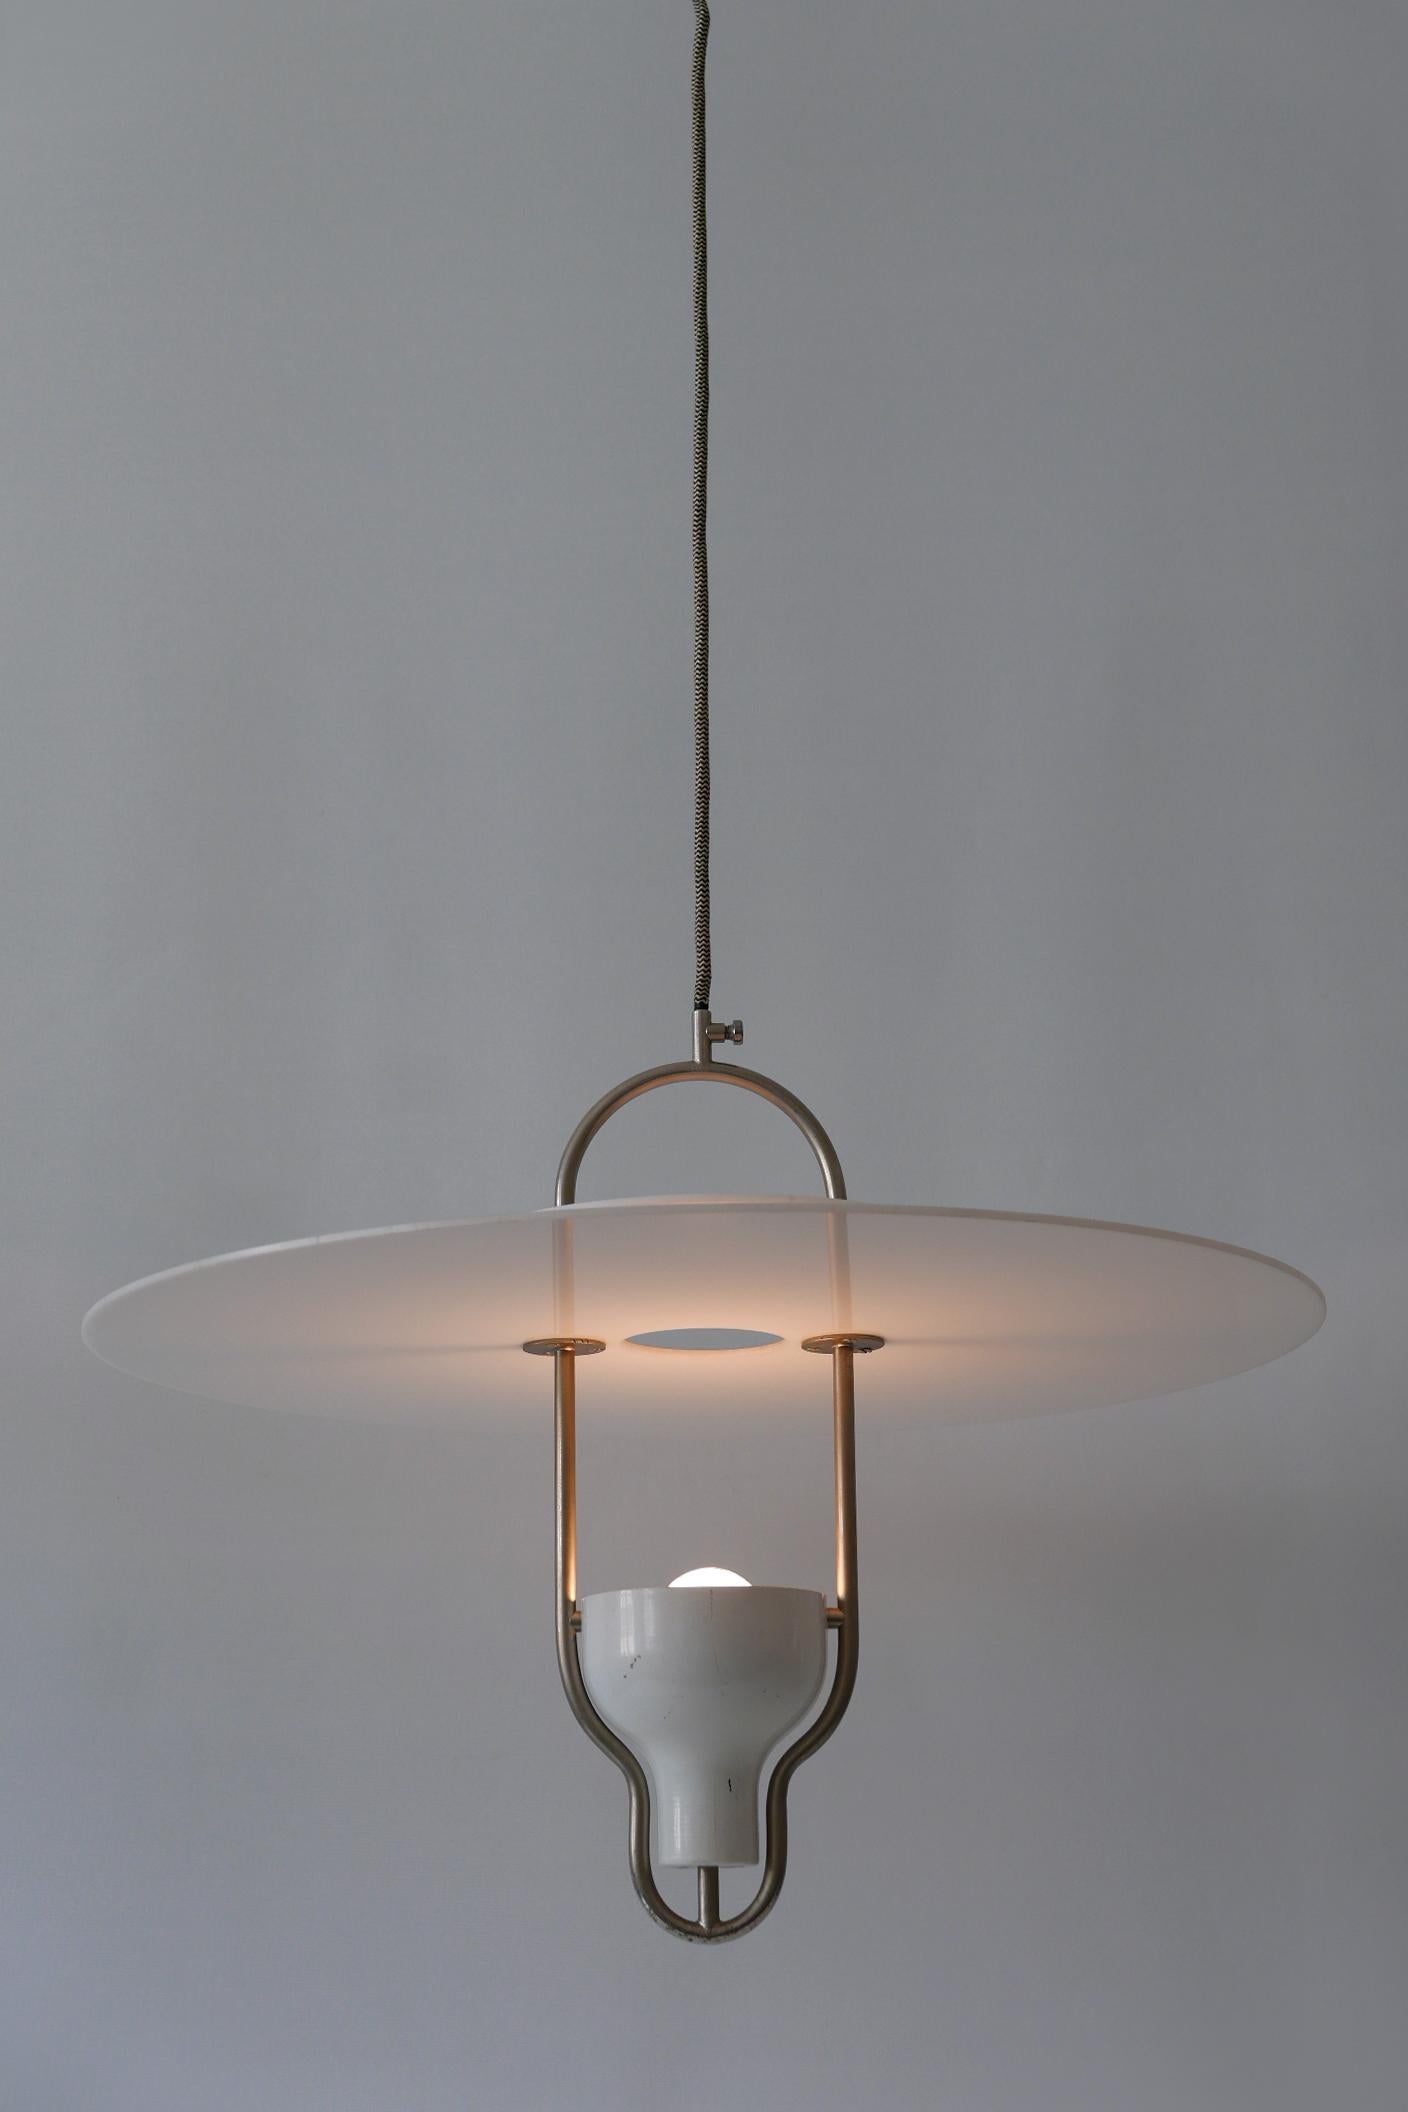 Exceptional Mid-Century Modern Ufo Pendant Lamp, Italy, 1960s For Sale 6